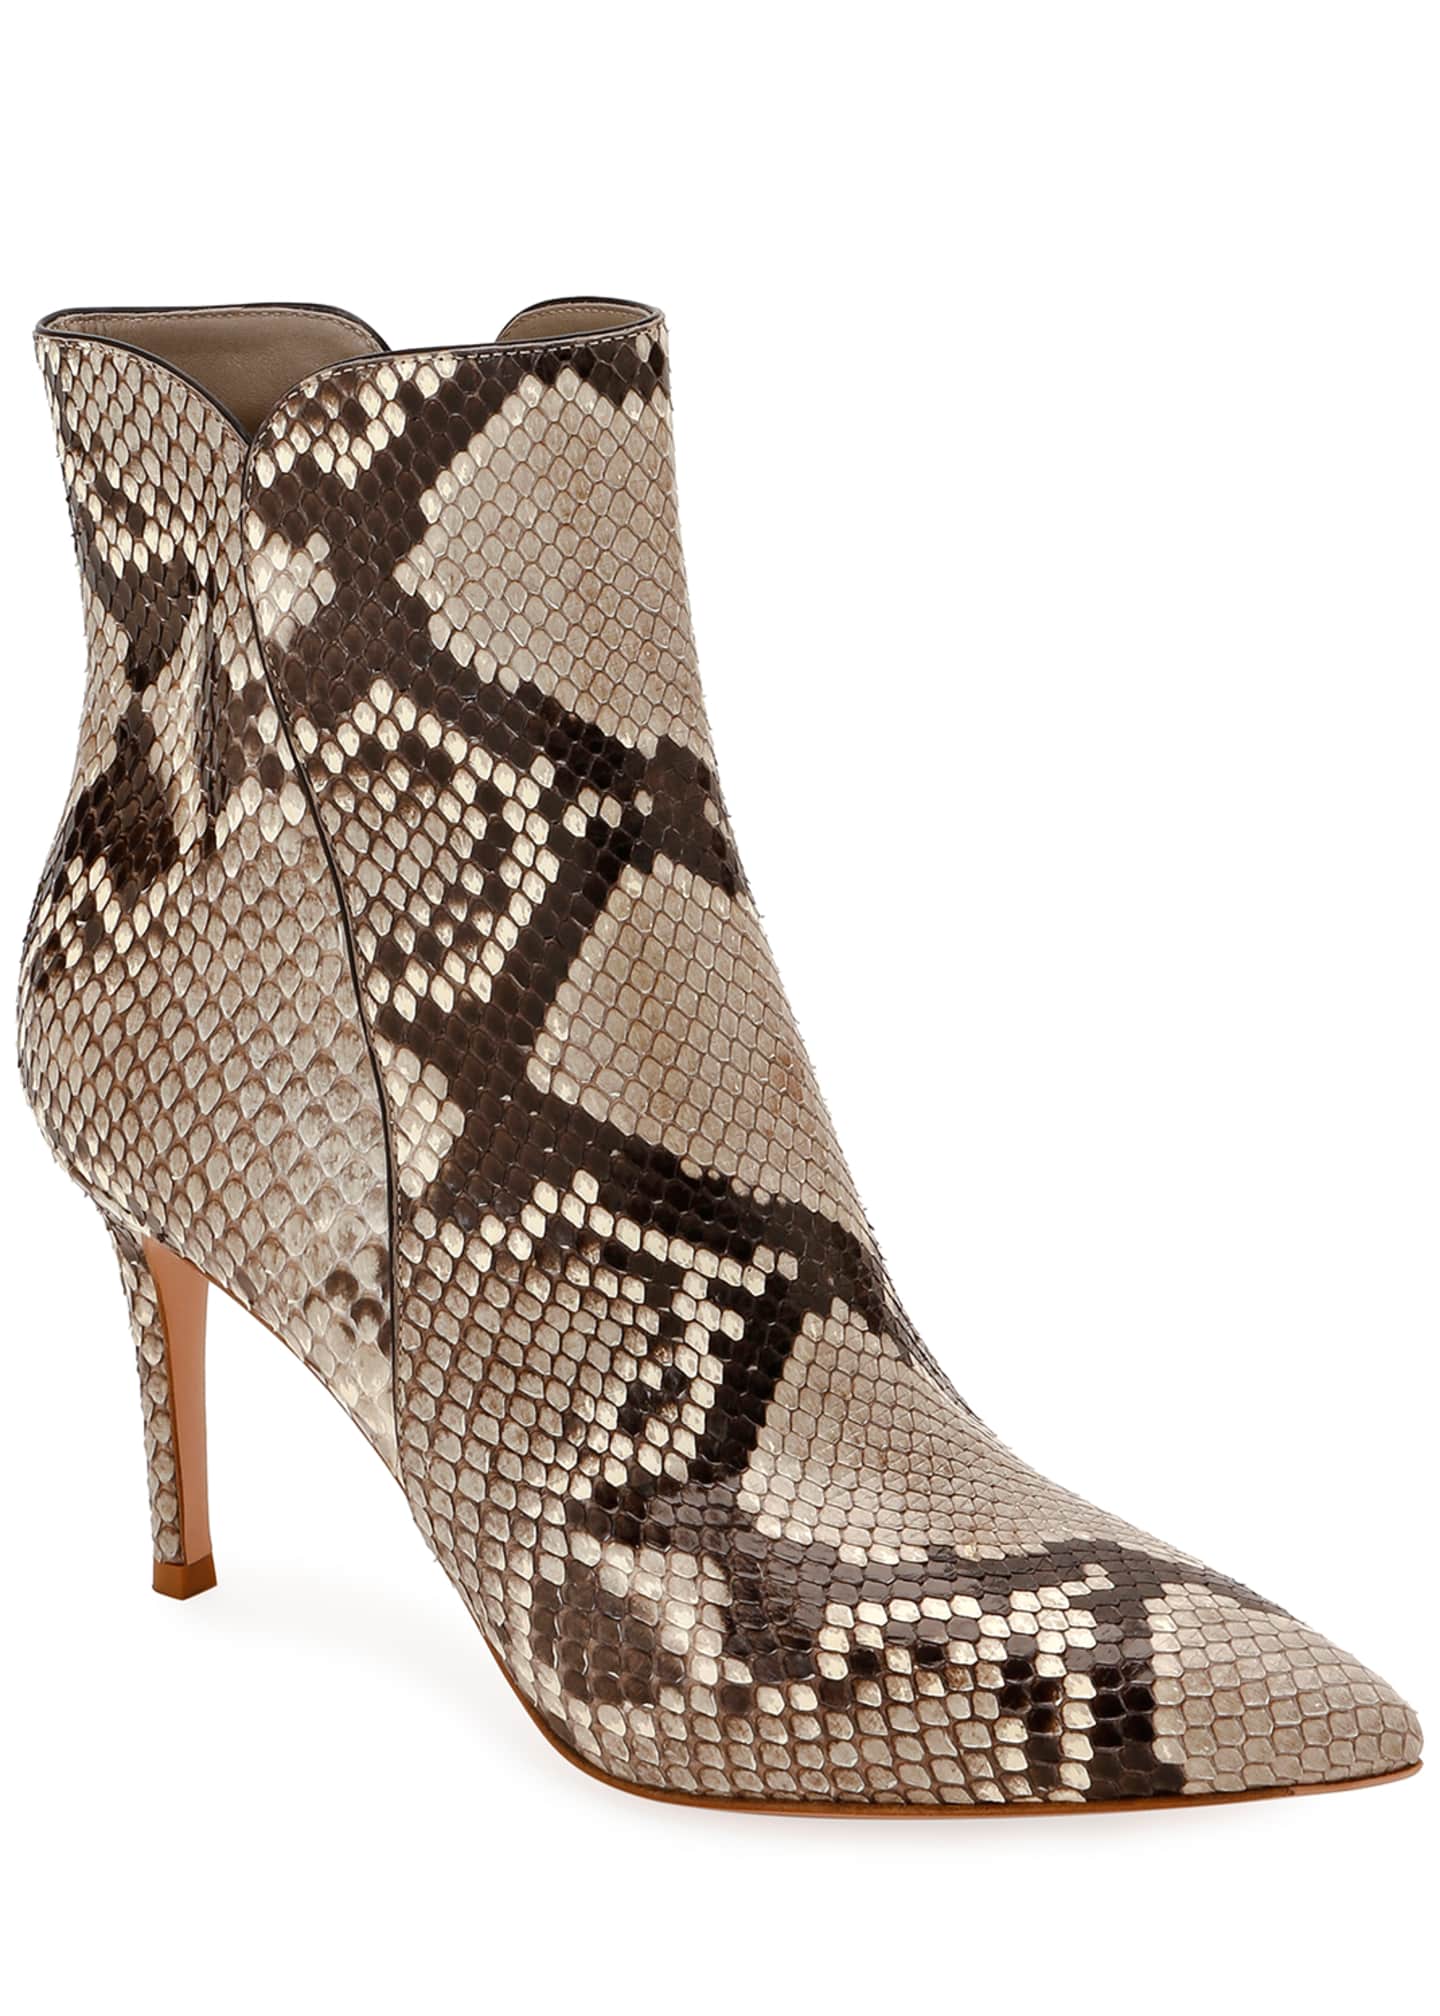 Gianvito Rossi Levy Notched Leather 85mm Booties - Bergdorf Goodman